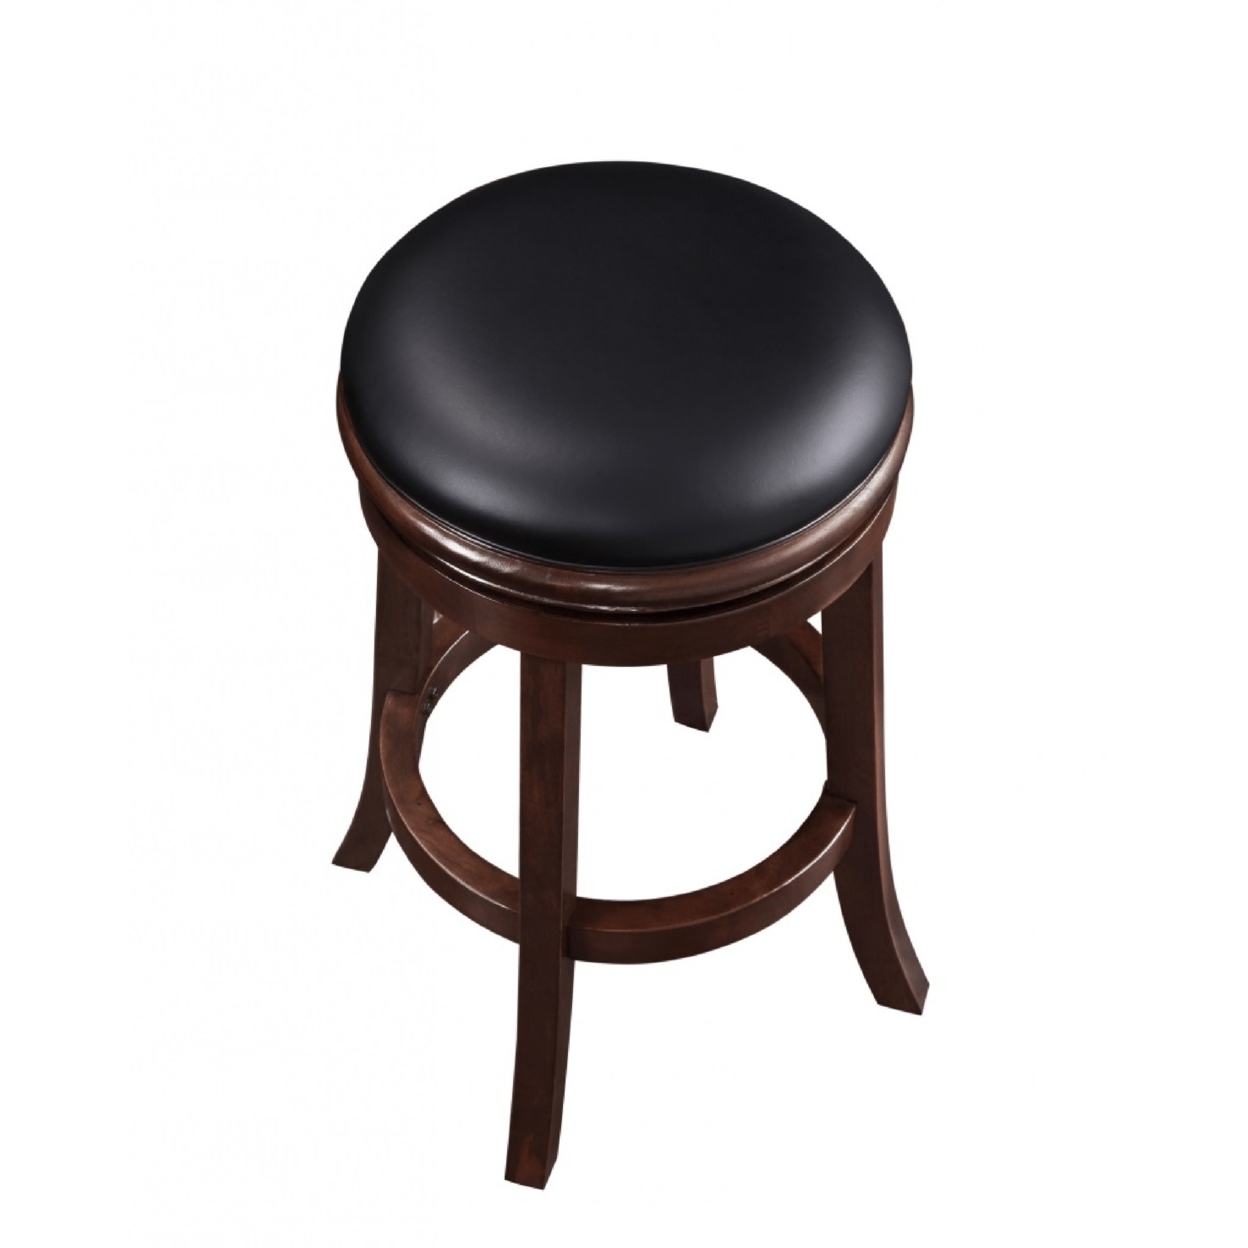 Sabi 29 Inch Swivel Counter Stool, Backless, Solid Wood, Faux Leather, Espresso Brown, Black